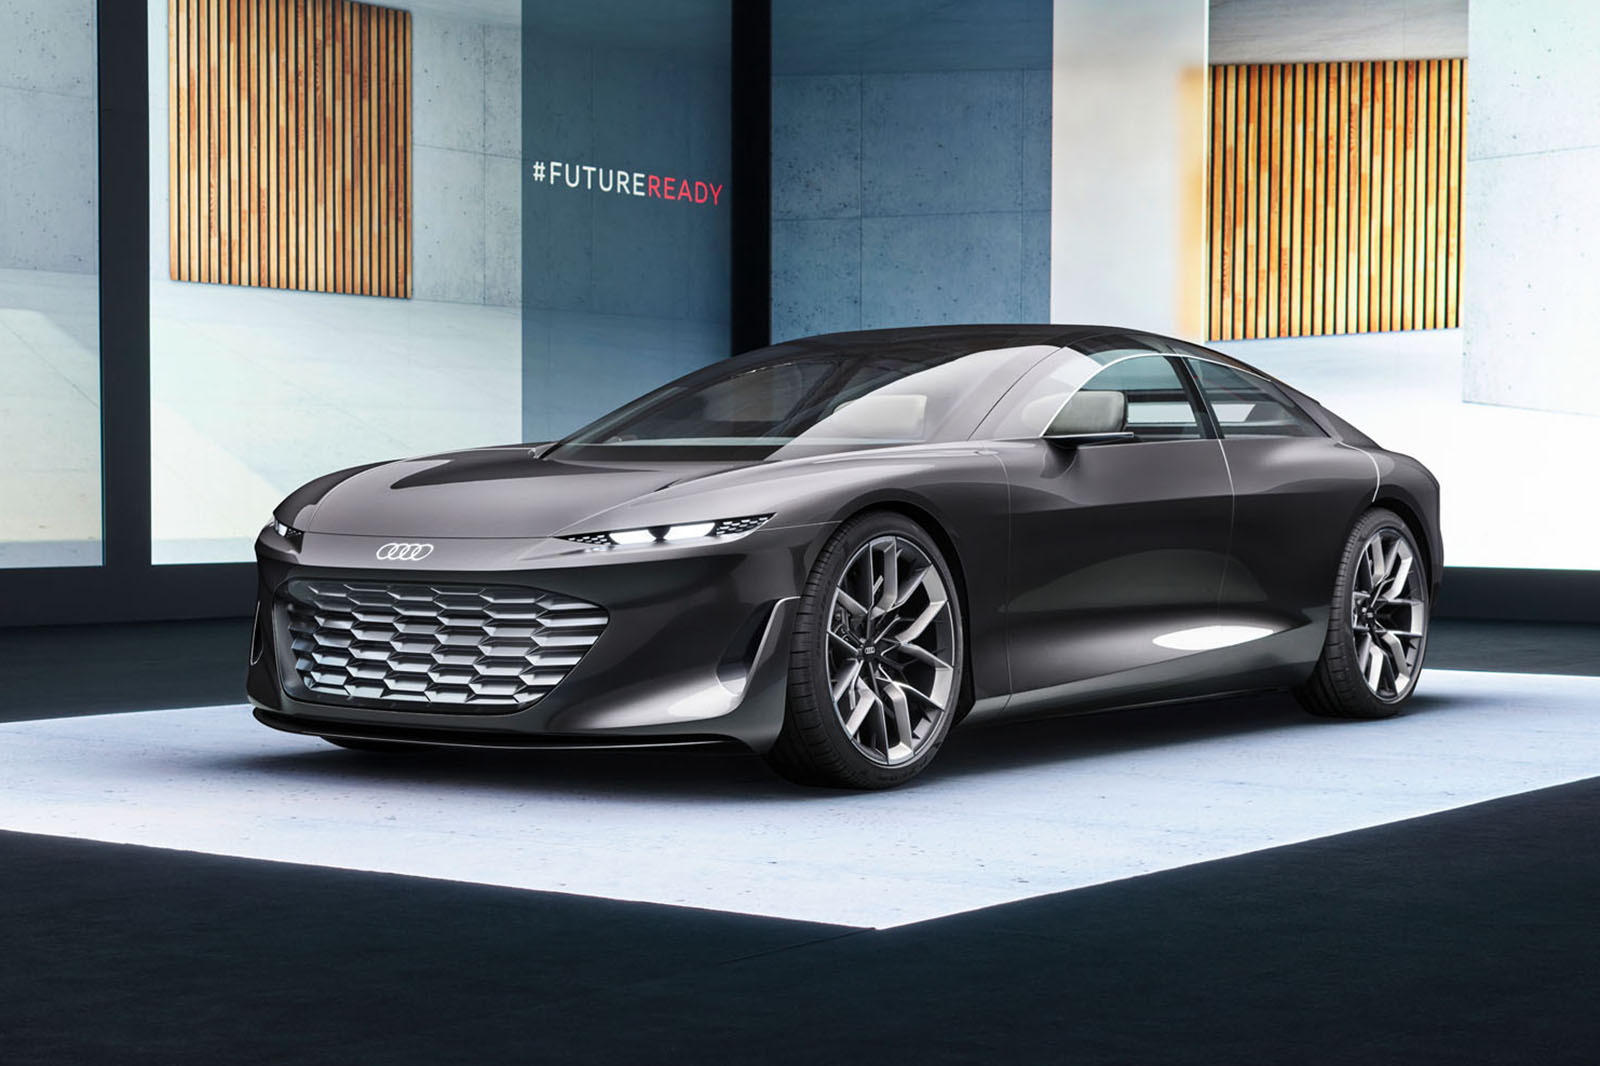 New 2024 Audi A8 will be "very close" to Grandsphere concept Autocar